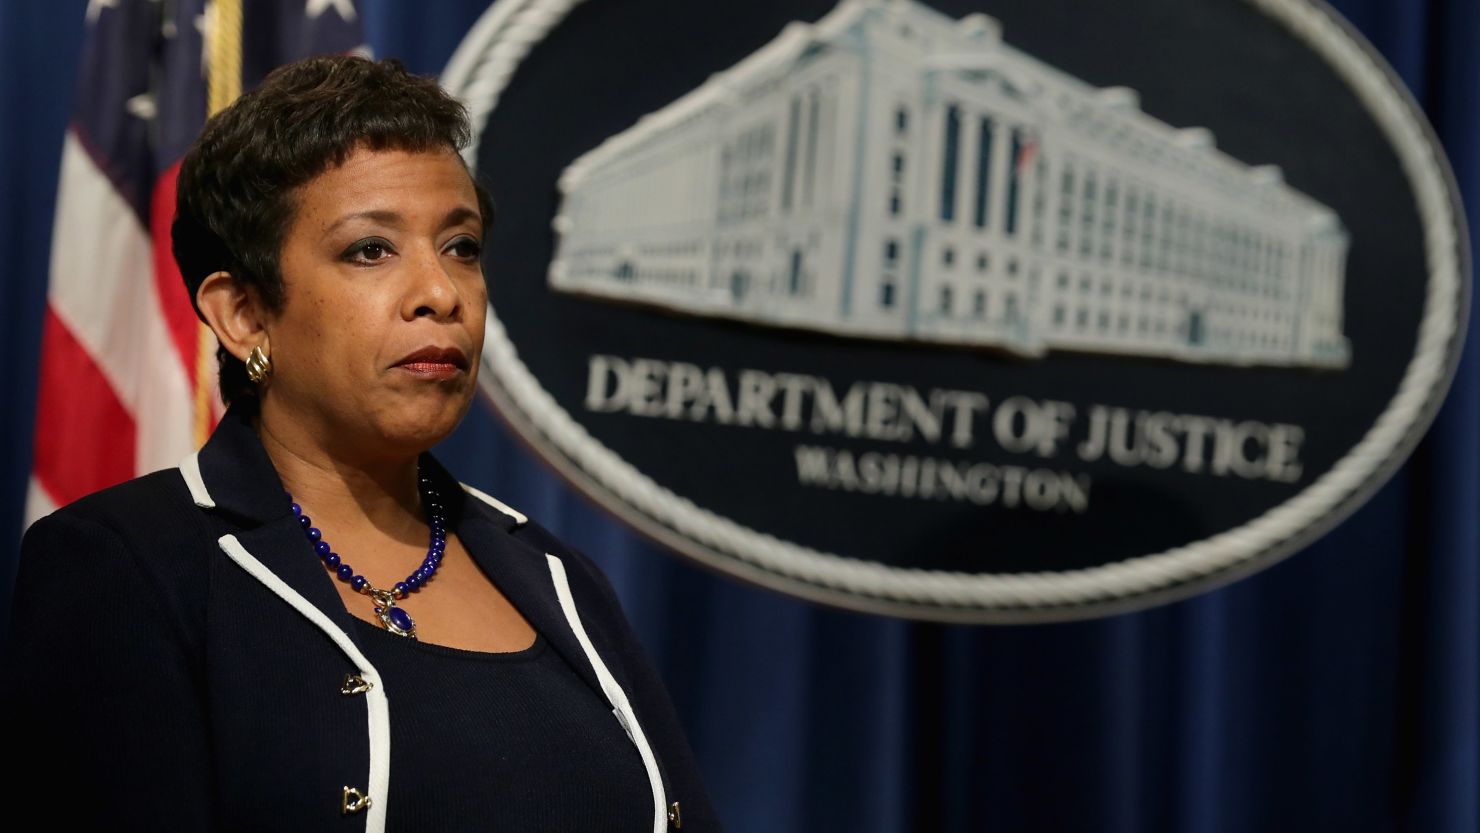 Attorney General Loretta Lynch announces a major civil settlement at the Justice Department November 16, 2015, in Washington, D.C.